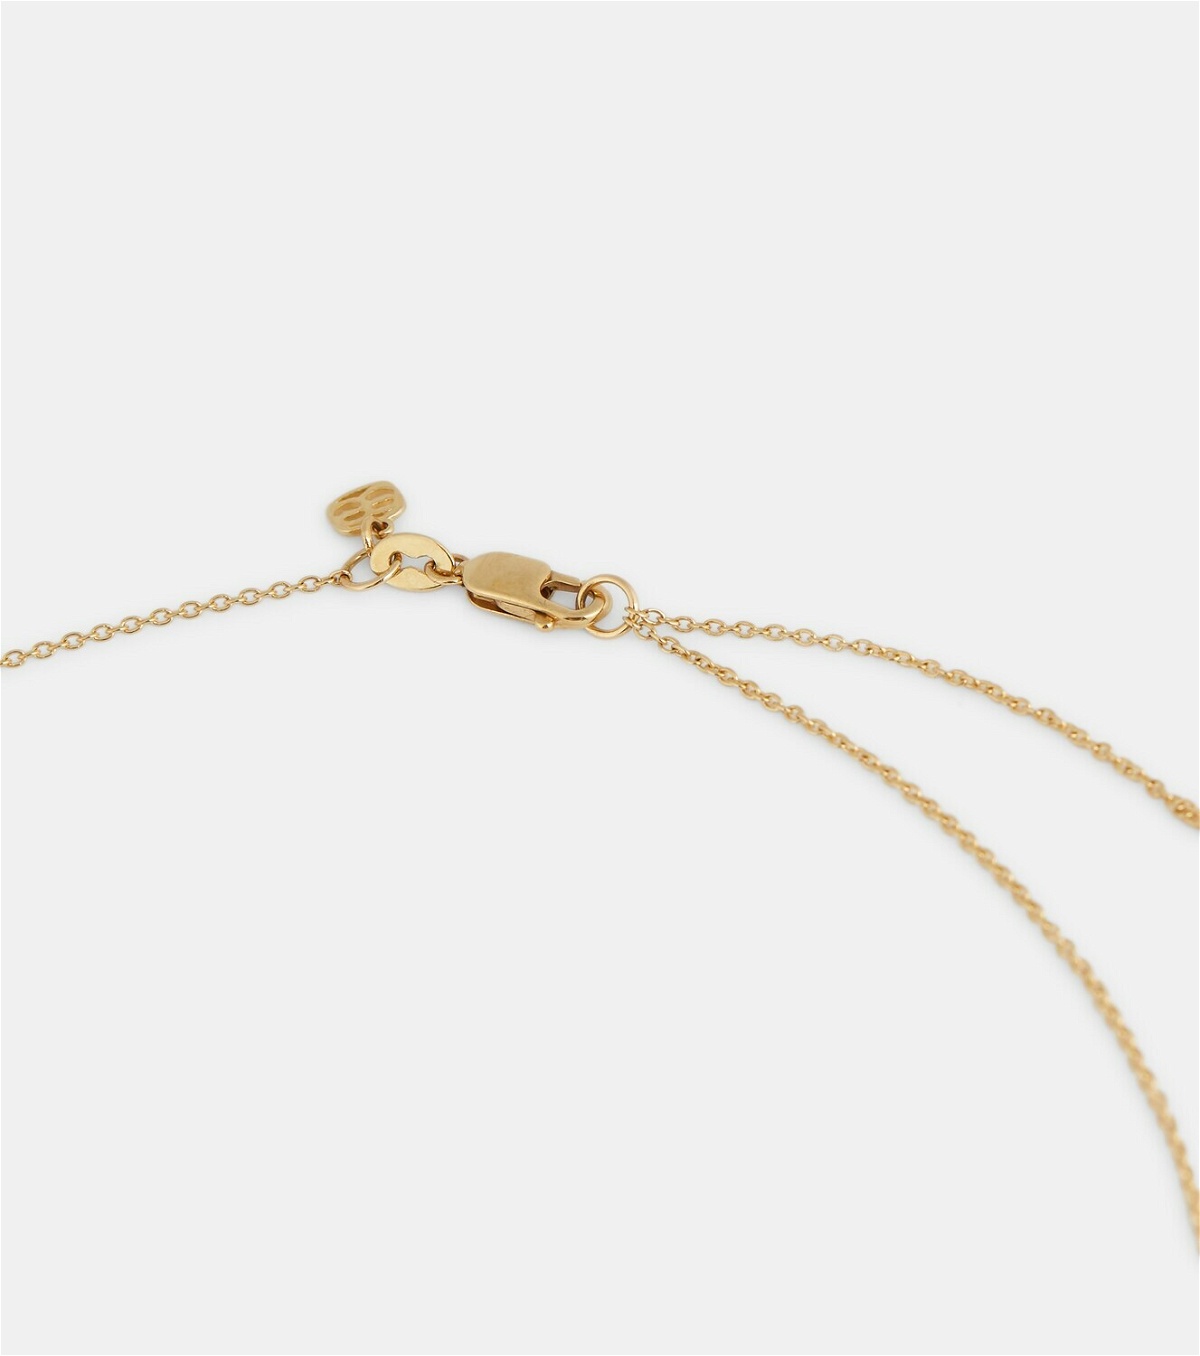 Sydney Evan Mama 14kt yellow gold necklace with diamonds